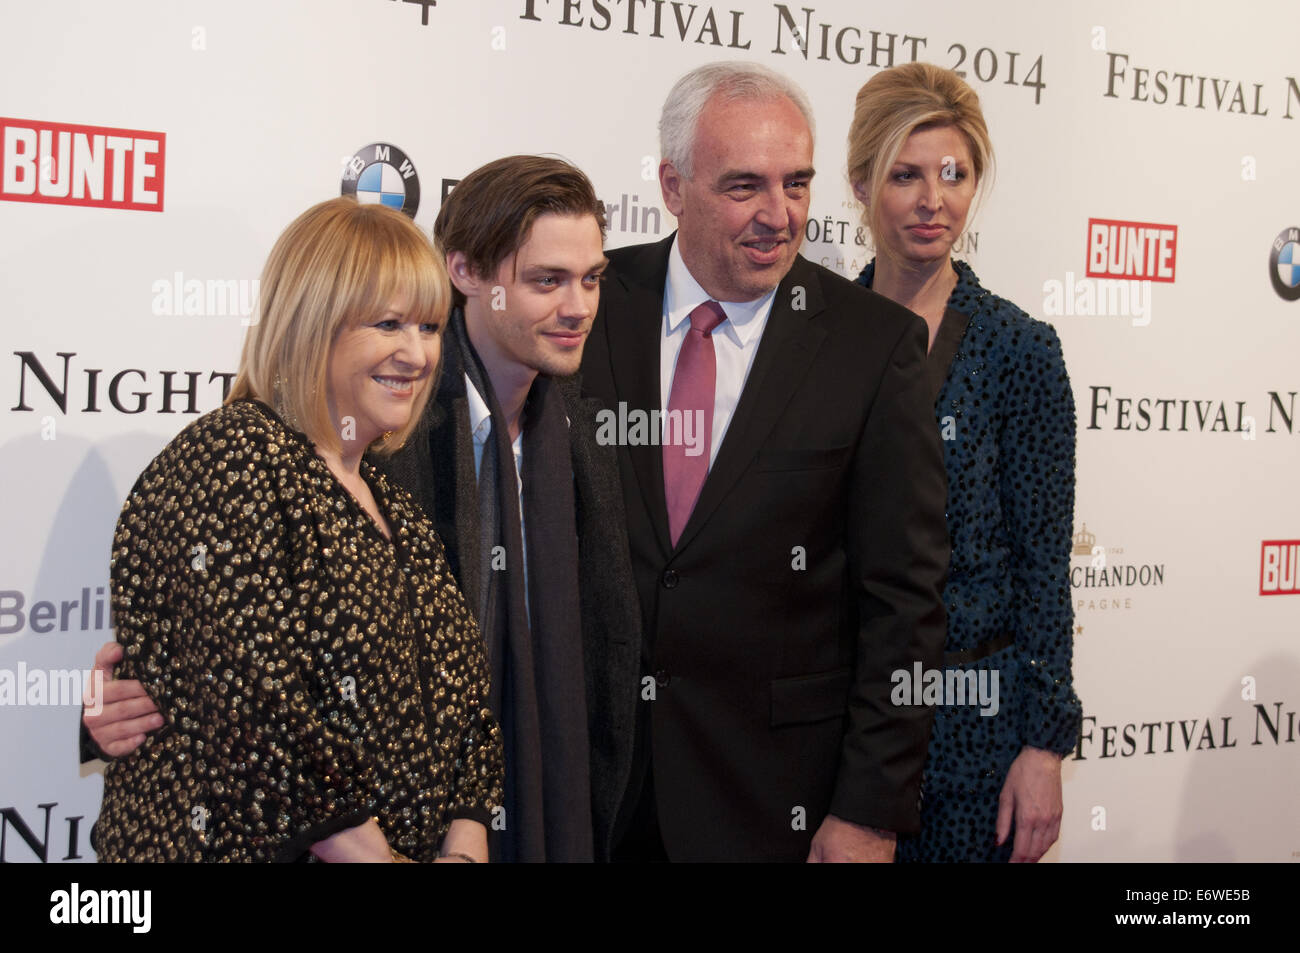 Bunte & BMW Festival Night 2014 during Berlin International Film Festival (Berlinale) at Humboldt Carrée.  Featuring: Patricia Riekel,Tom Payne,Hans-Reiner Schroeder Where: Berlin, Germany When: 08 Feb 2014 Stock Photo